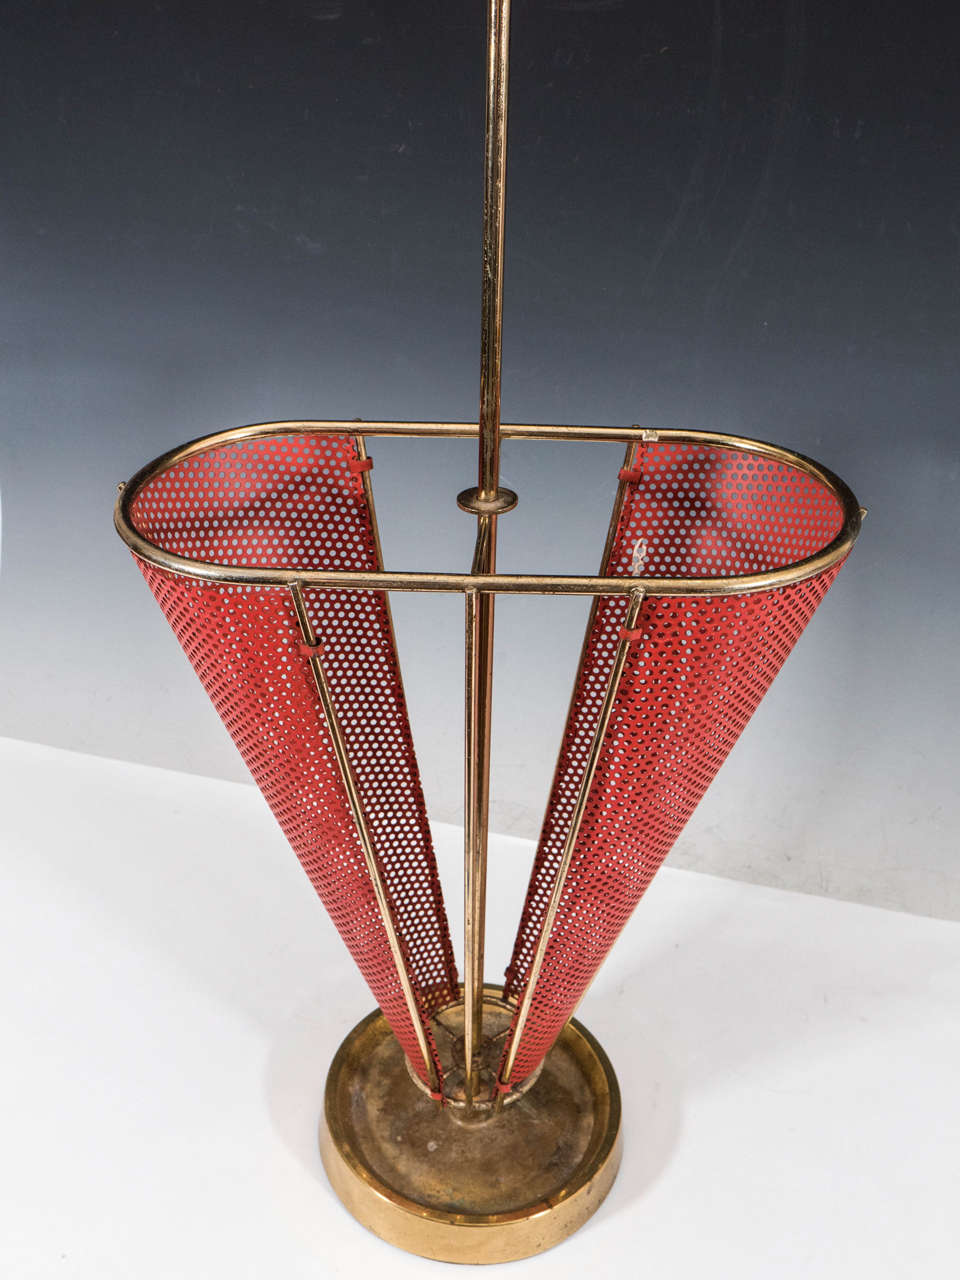 20th Century Midcentury Brass-Plated and Red Enameled Italian Umbrella Stand For Sale